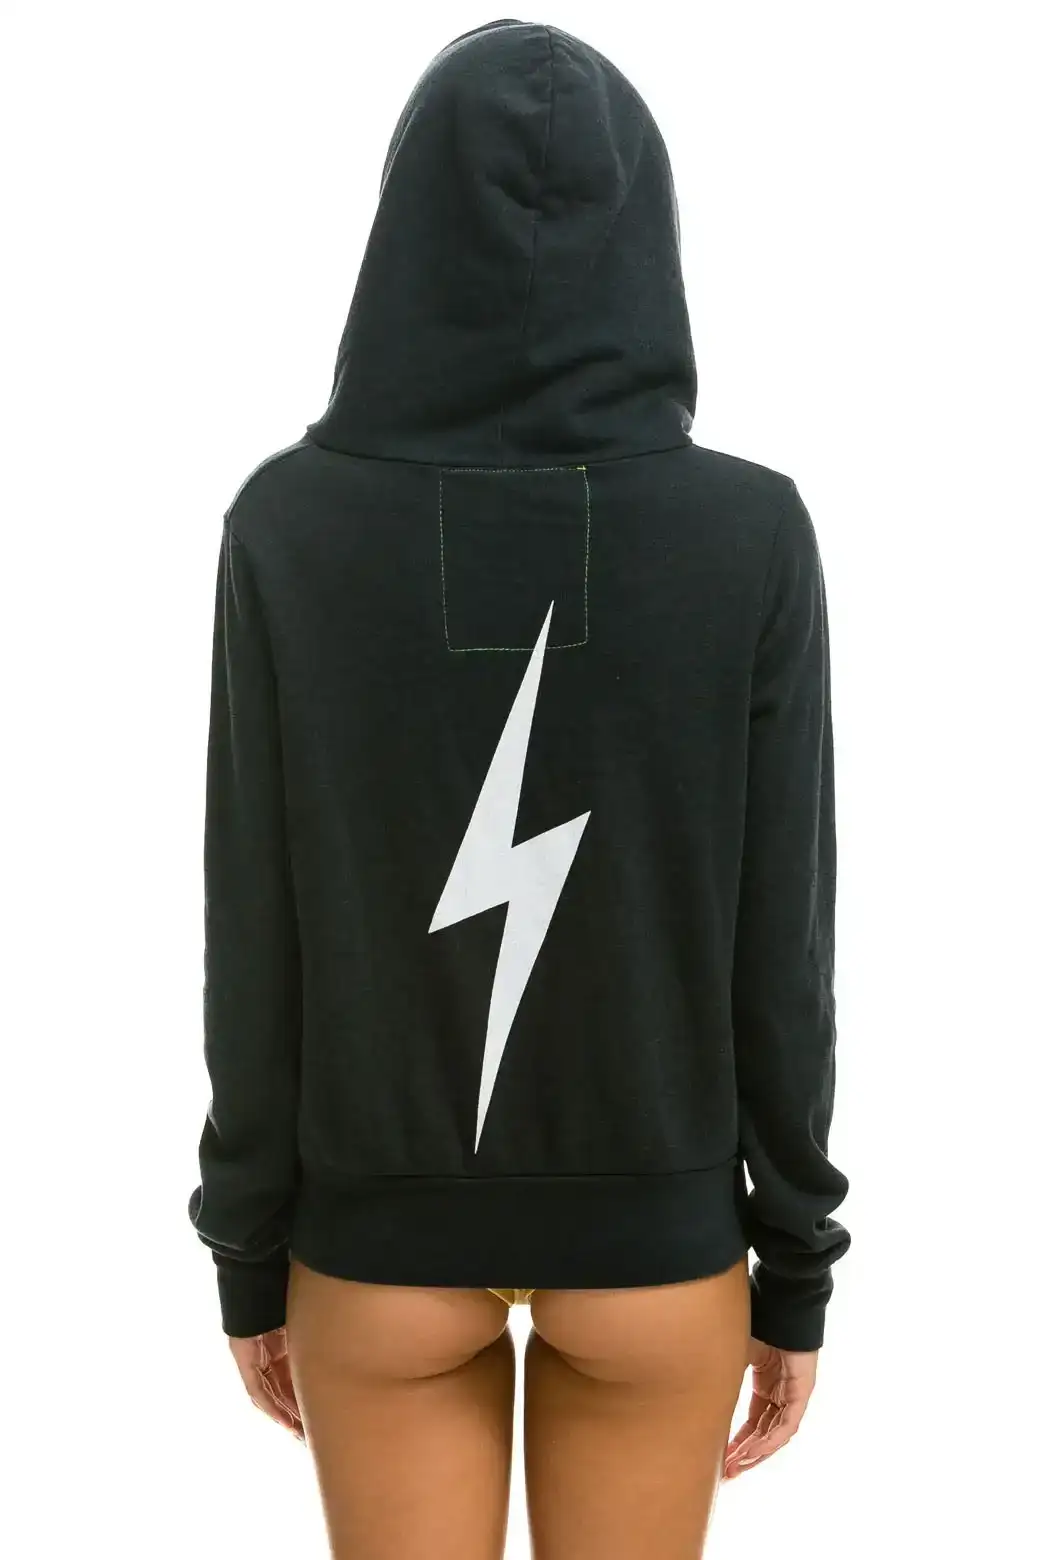 Image of BOLT HOODIE - CHARCOAL